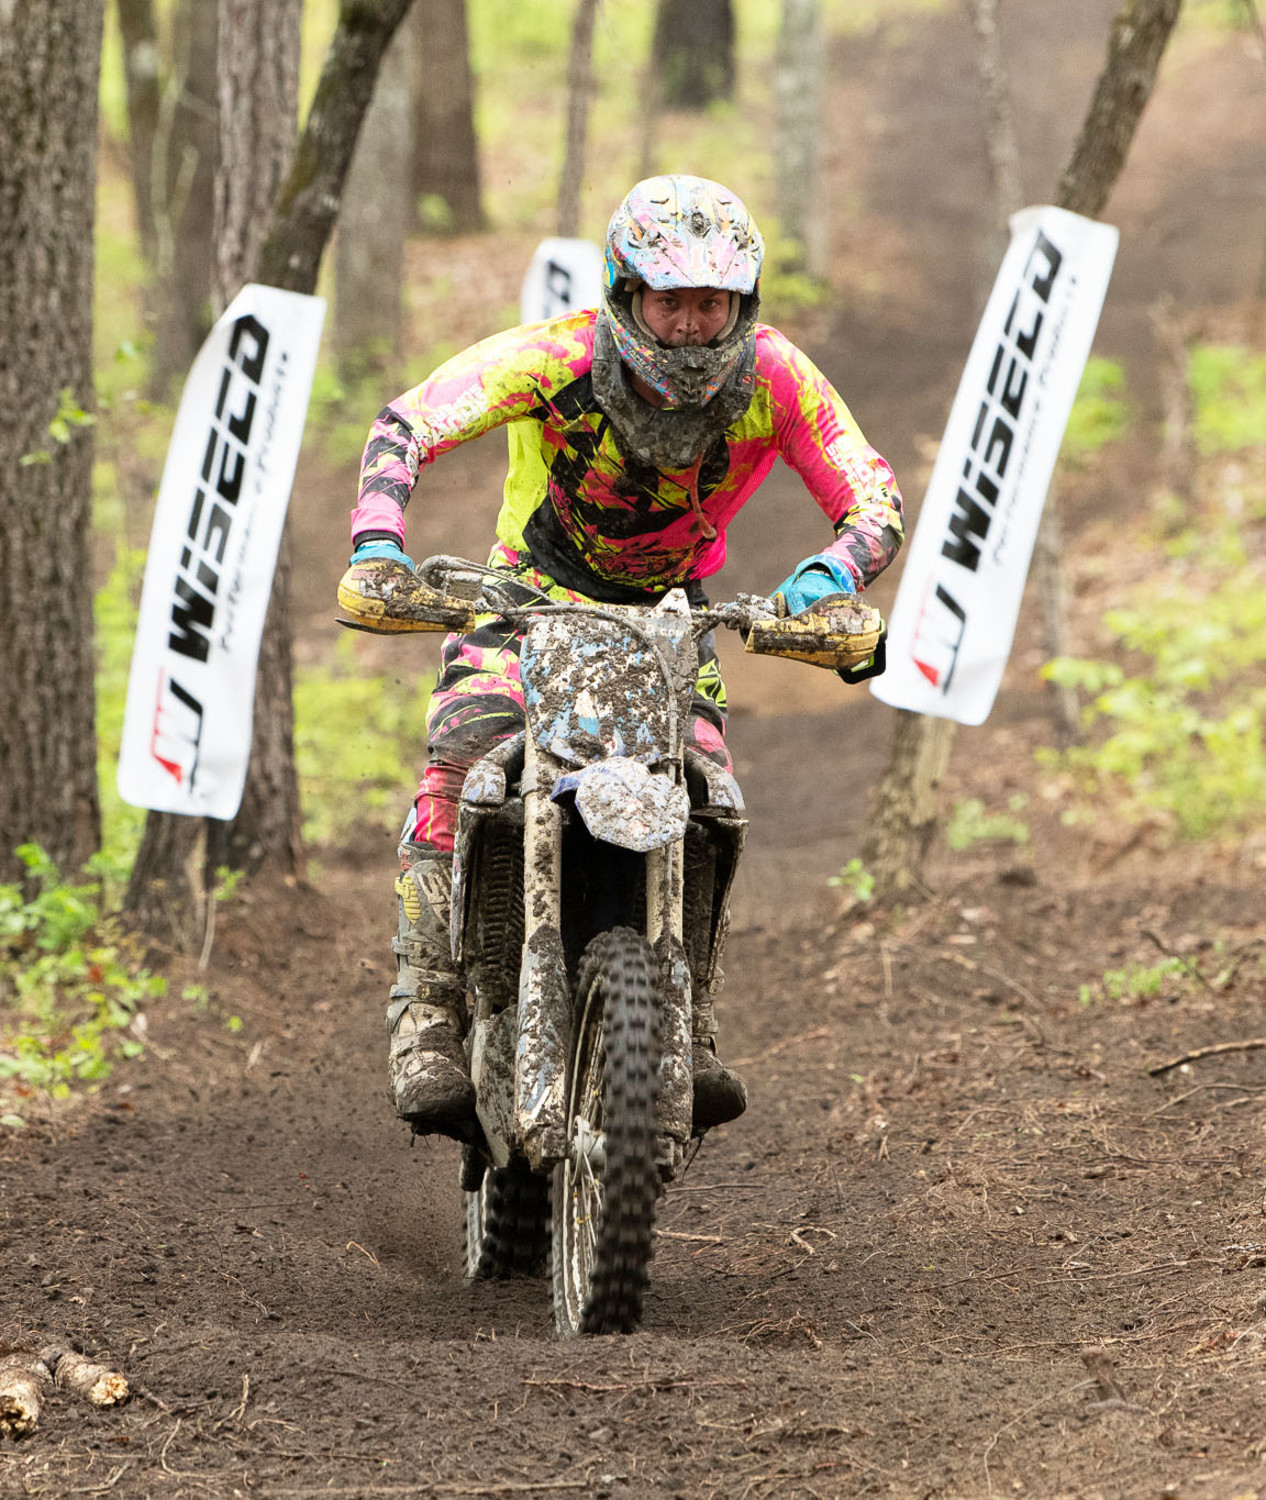 Sumter native Josh McCoy tries his luck at the GNCC Manning Live hq image